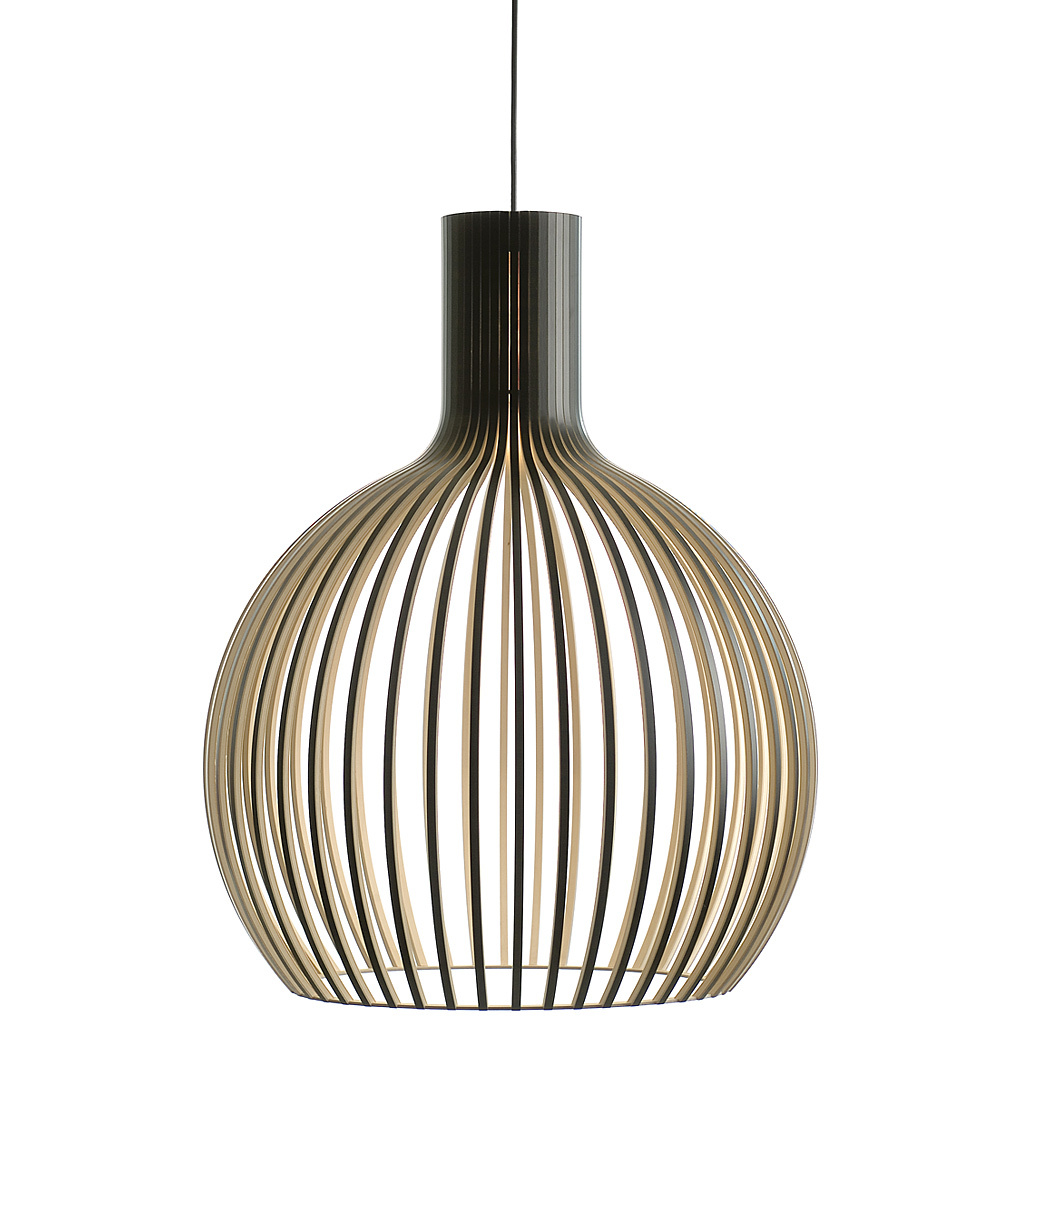 Octo 4240 pendant lamp is available in black laminated